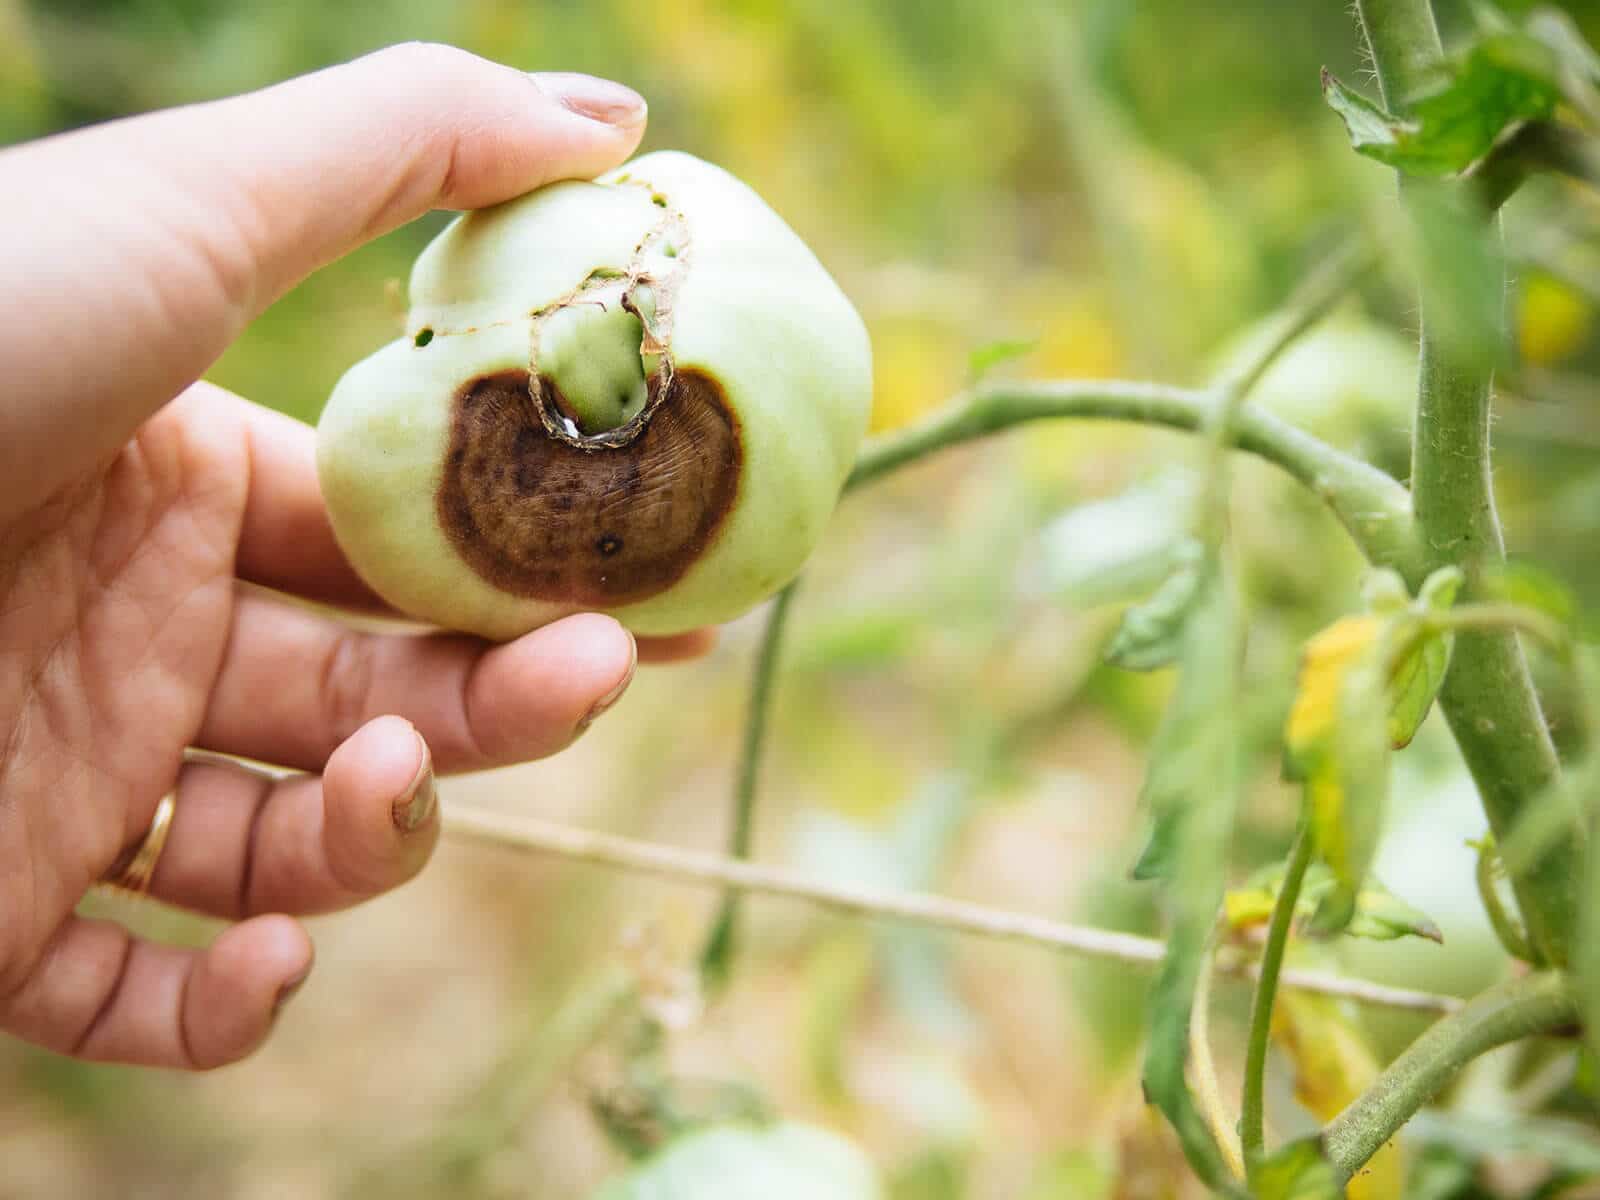 Blossom end rot on an unripe tomato